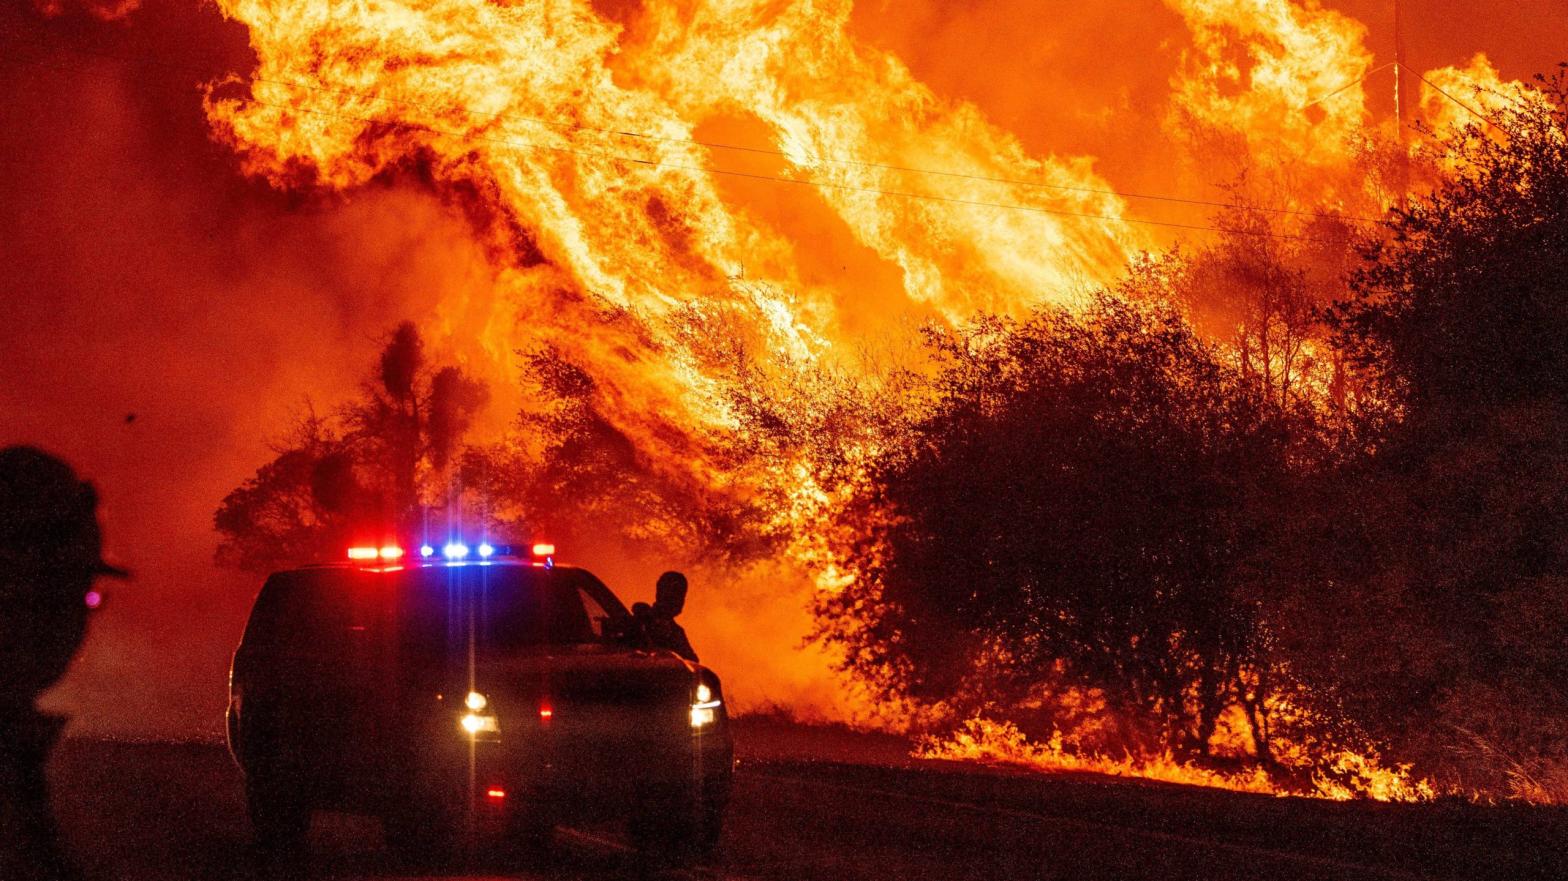 A law enforcement officer watches flames launch into the air as fire continues to spread during the Bear fire in Oroville, California on September 9, 2020. Dangerous dry winds whipped up California's record-breaking wildfires and ignited new blazes, as hundreds were evacuated by helicopter and tens of thousands were plunged into darkness by power outages across the western United States.  (Photo: Josh Edelson/AFP, Getty Images)